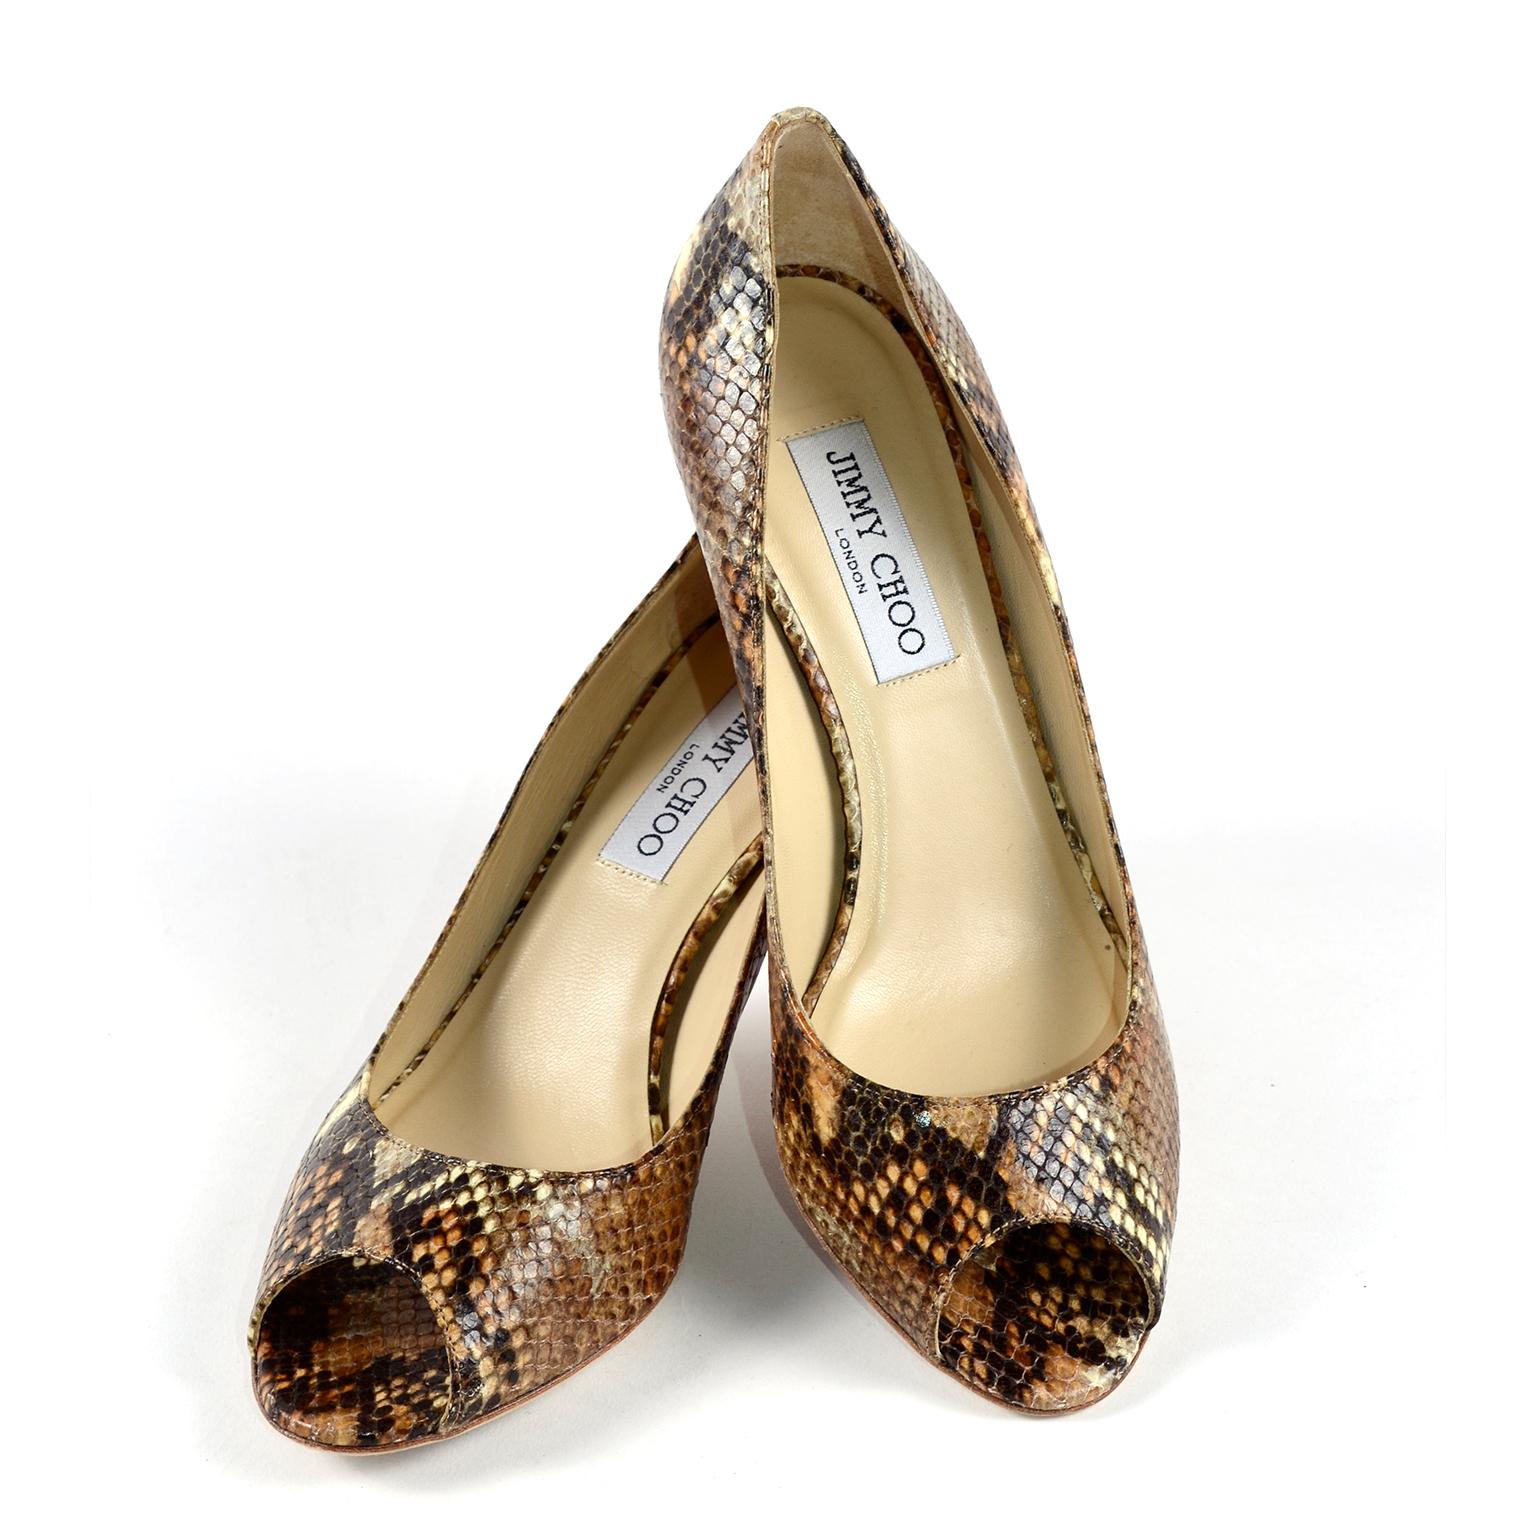 These are great Jimmy Choo Isabel shoes with just under 3